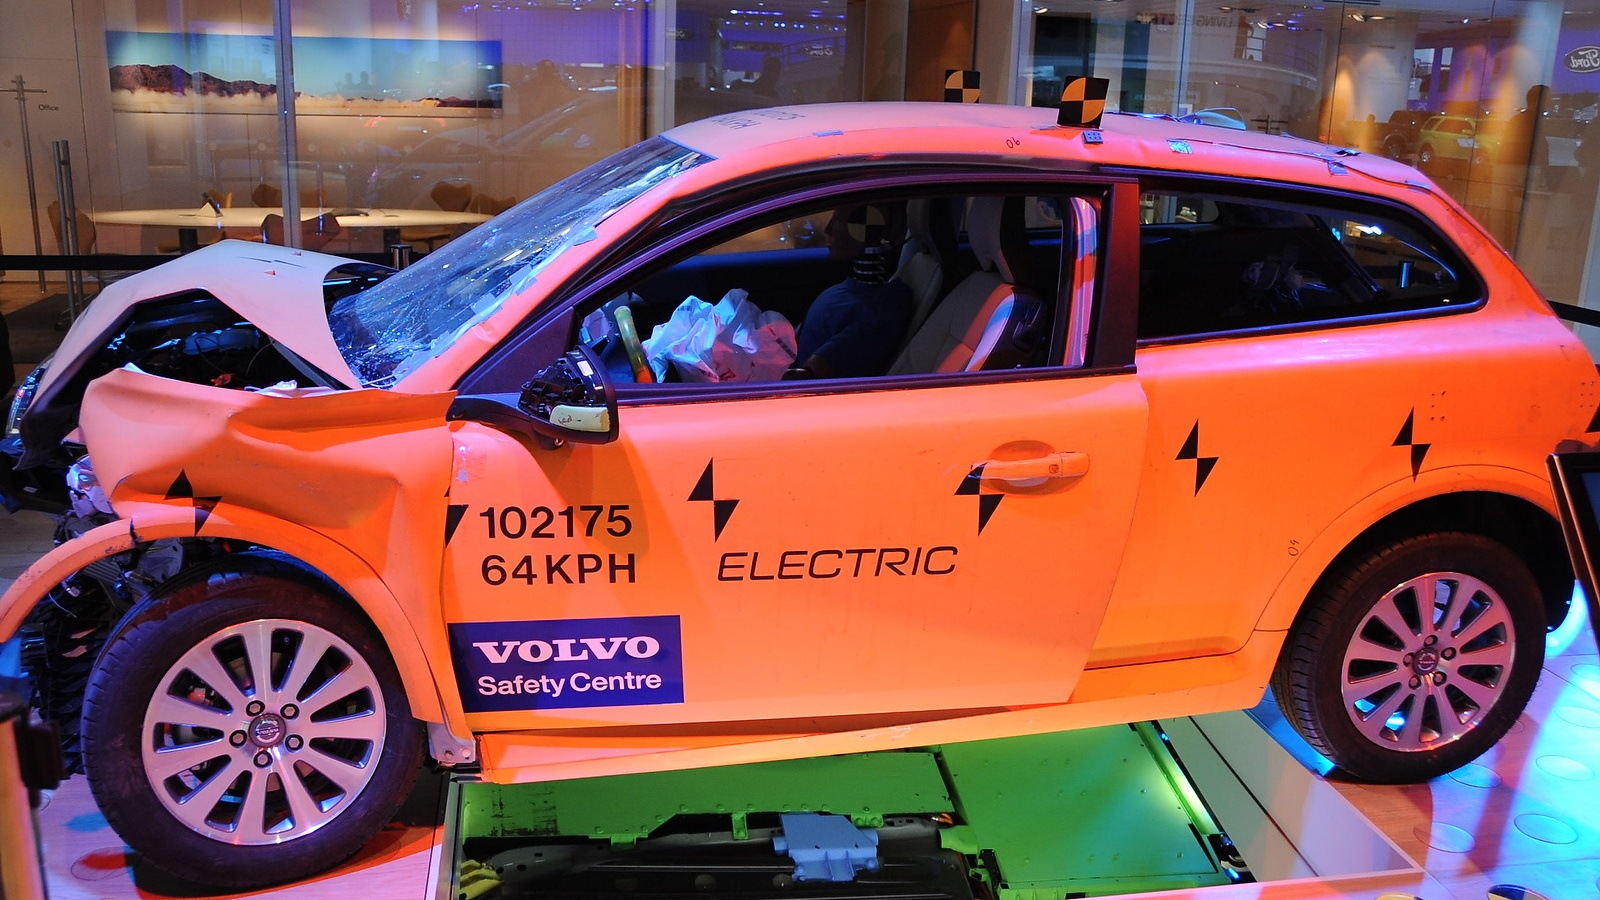 Volvo C30 electric car after crash testing. Photo by Joe Nuxoll.